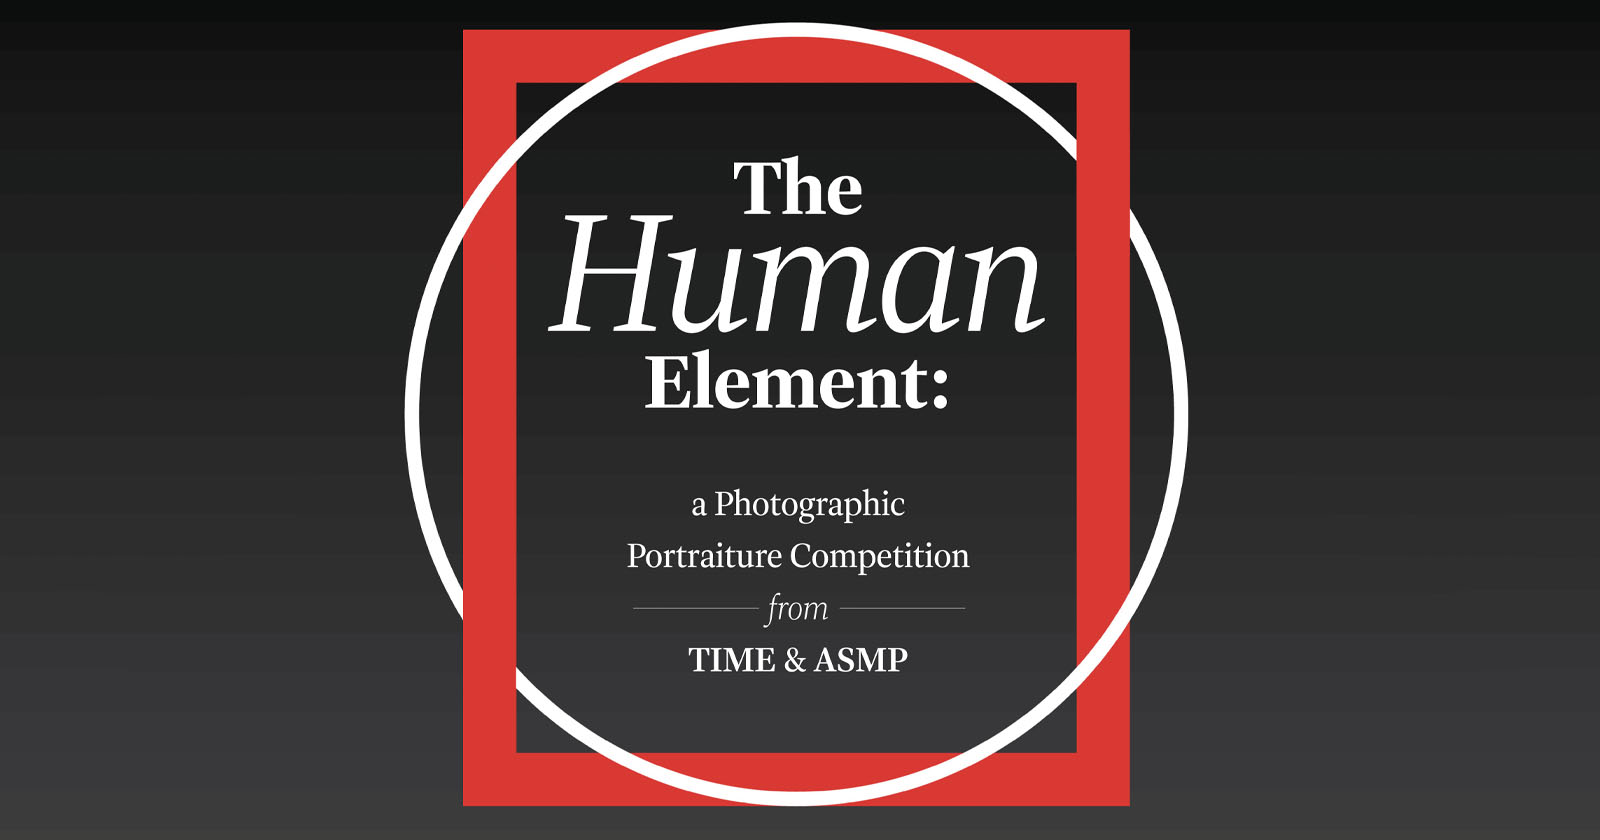 The Human Element is a New Portrait Competition from TIME and ASMP